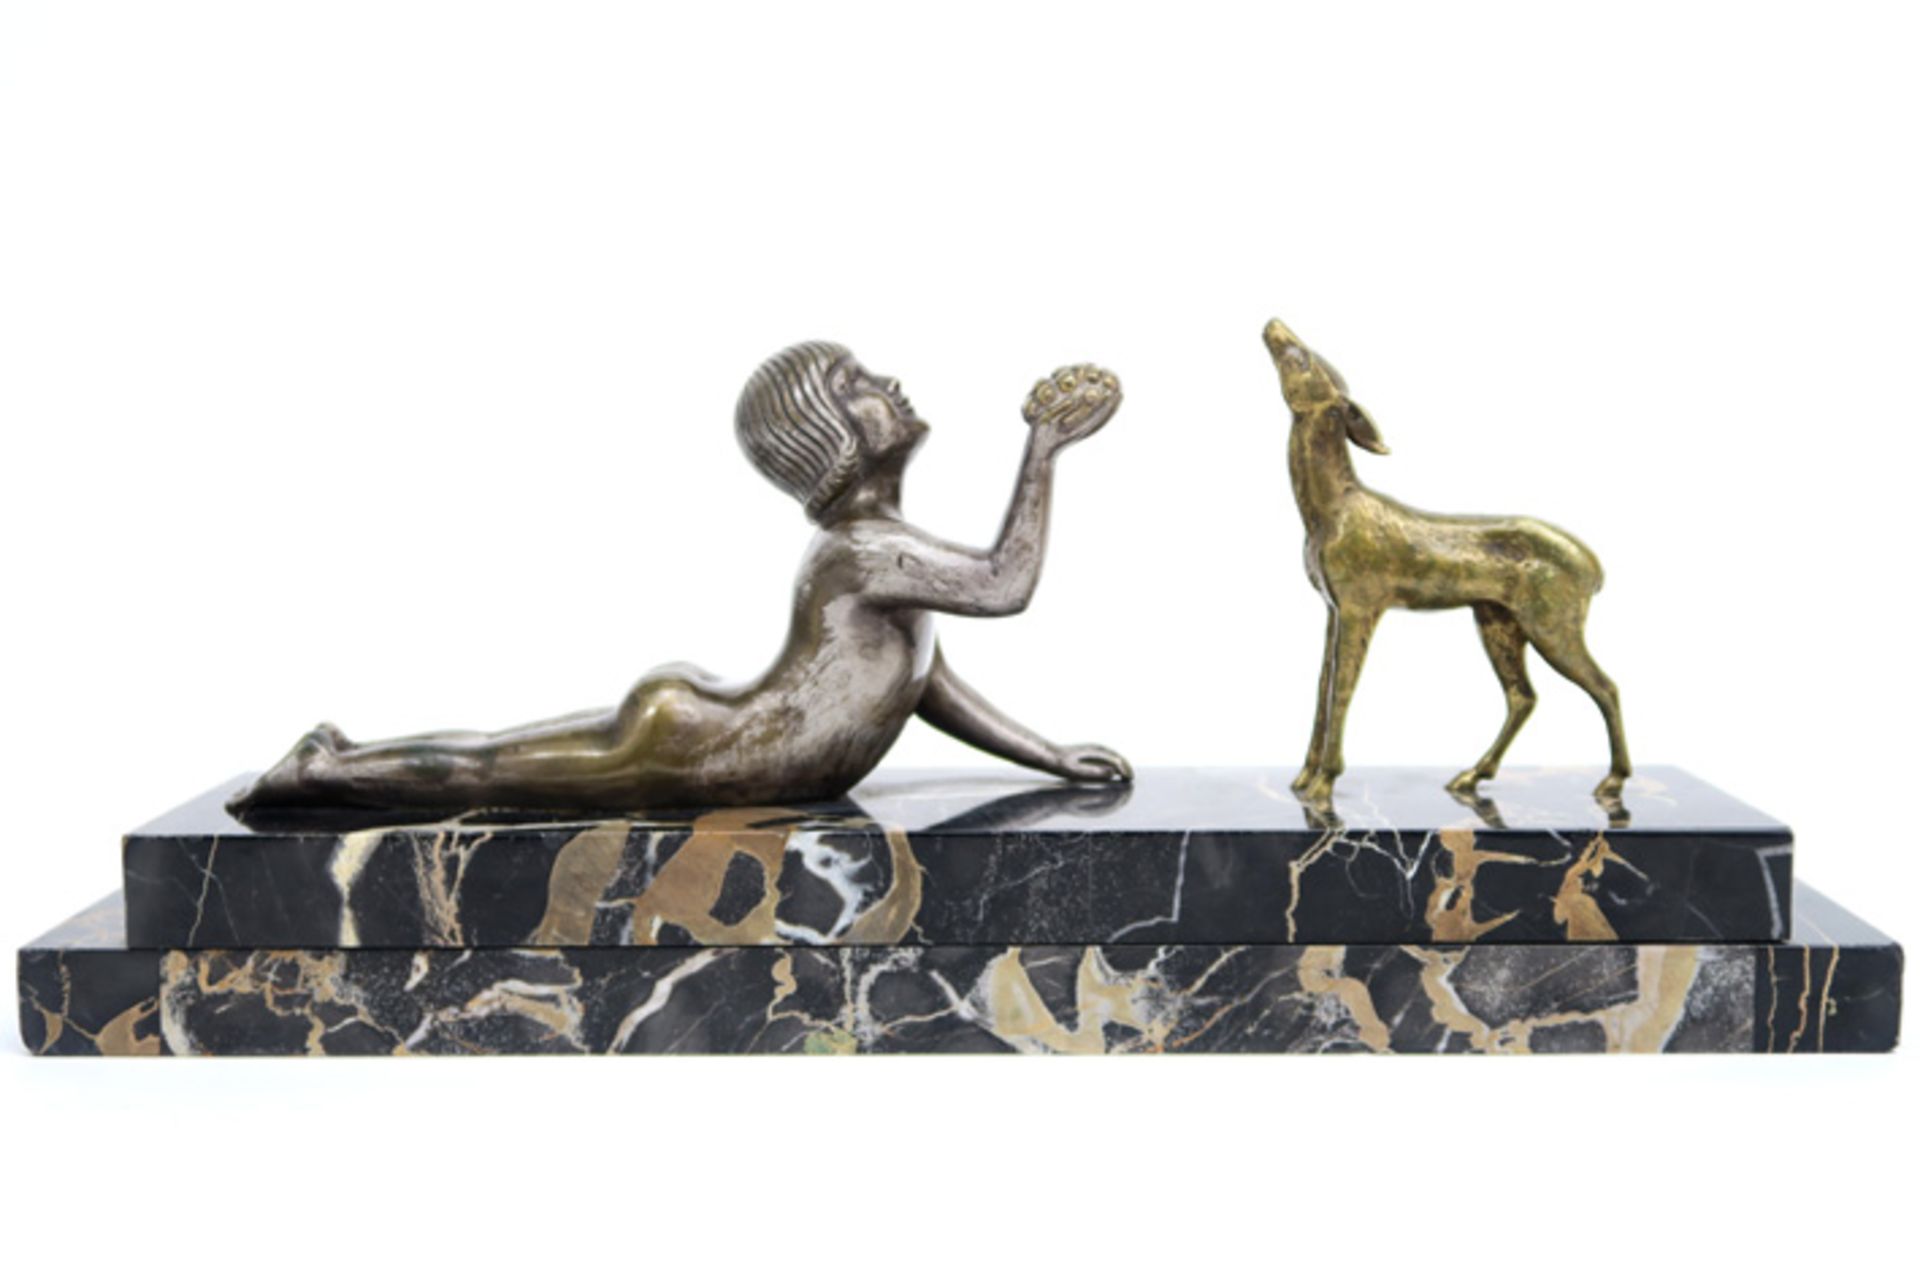 Zoltan Kovats signed double sculpture in bronze on a base in typical marble also with a "Editions - Bild 3 aus 5